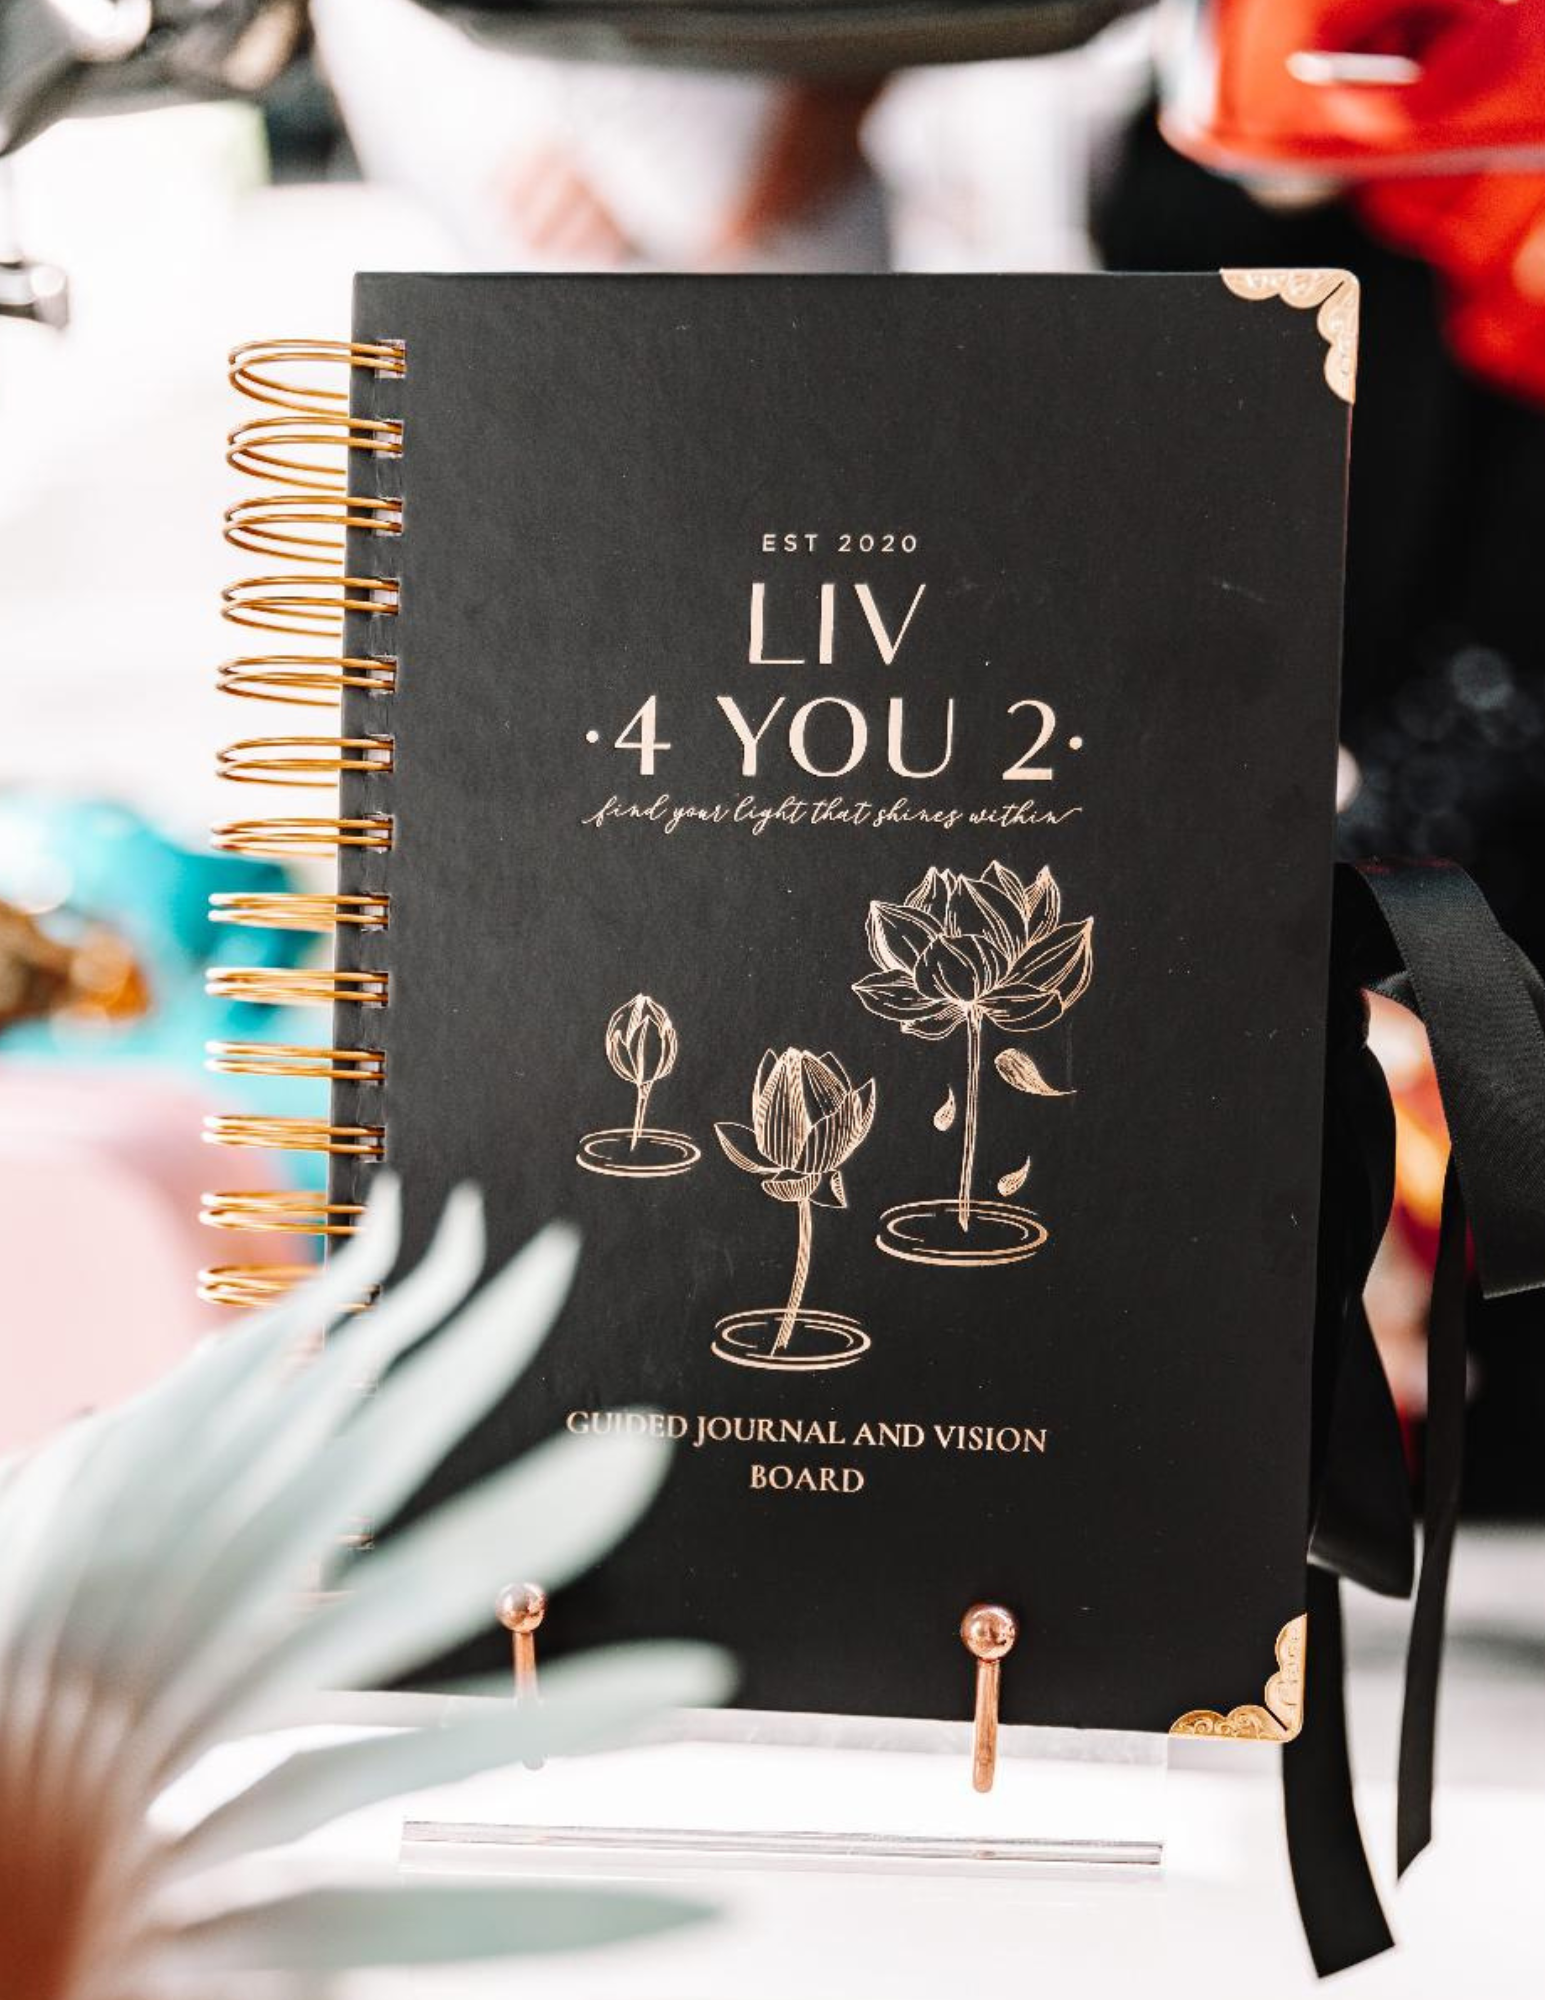 Vision Board Book LUXE - Journal with Integrated Vision Boards, Categorized  Dreams, and Gratitude Rituals - Black